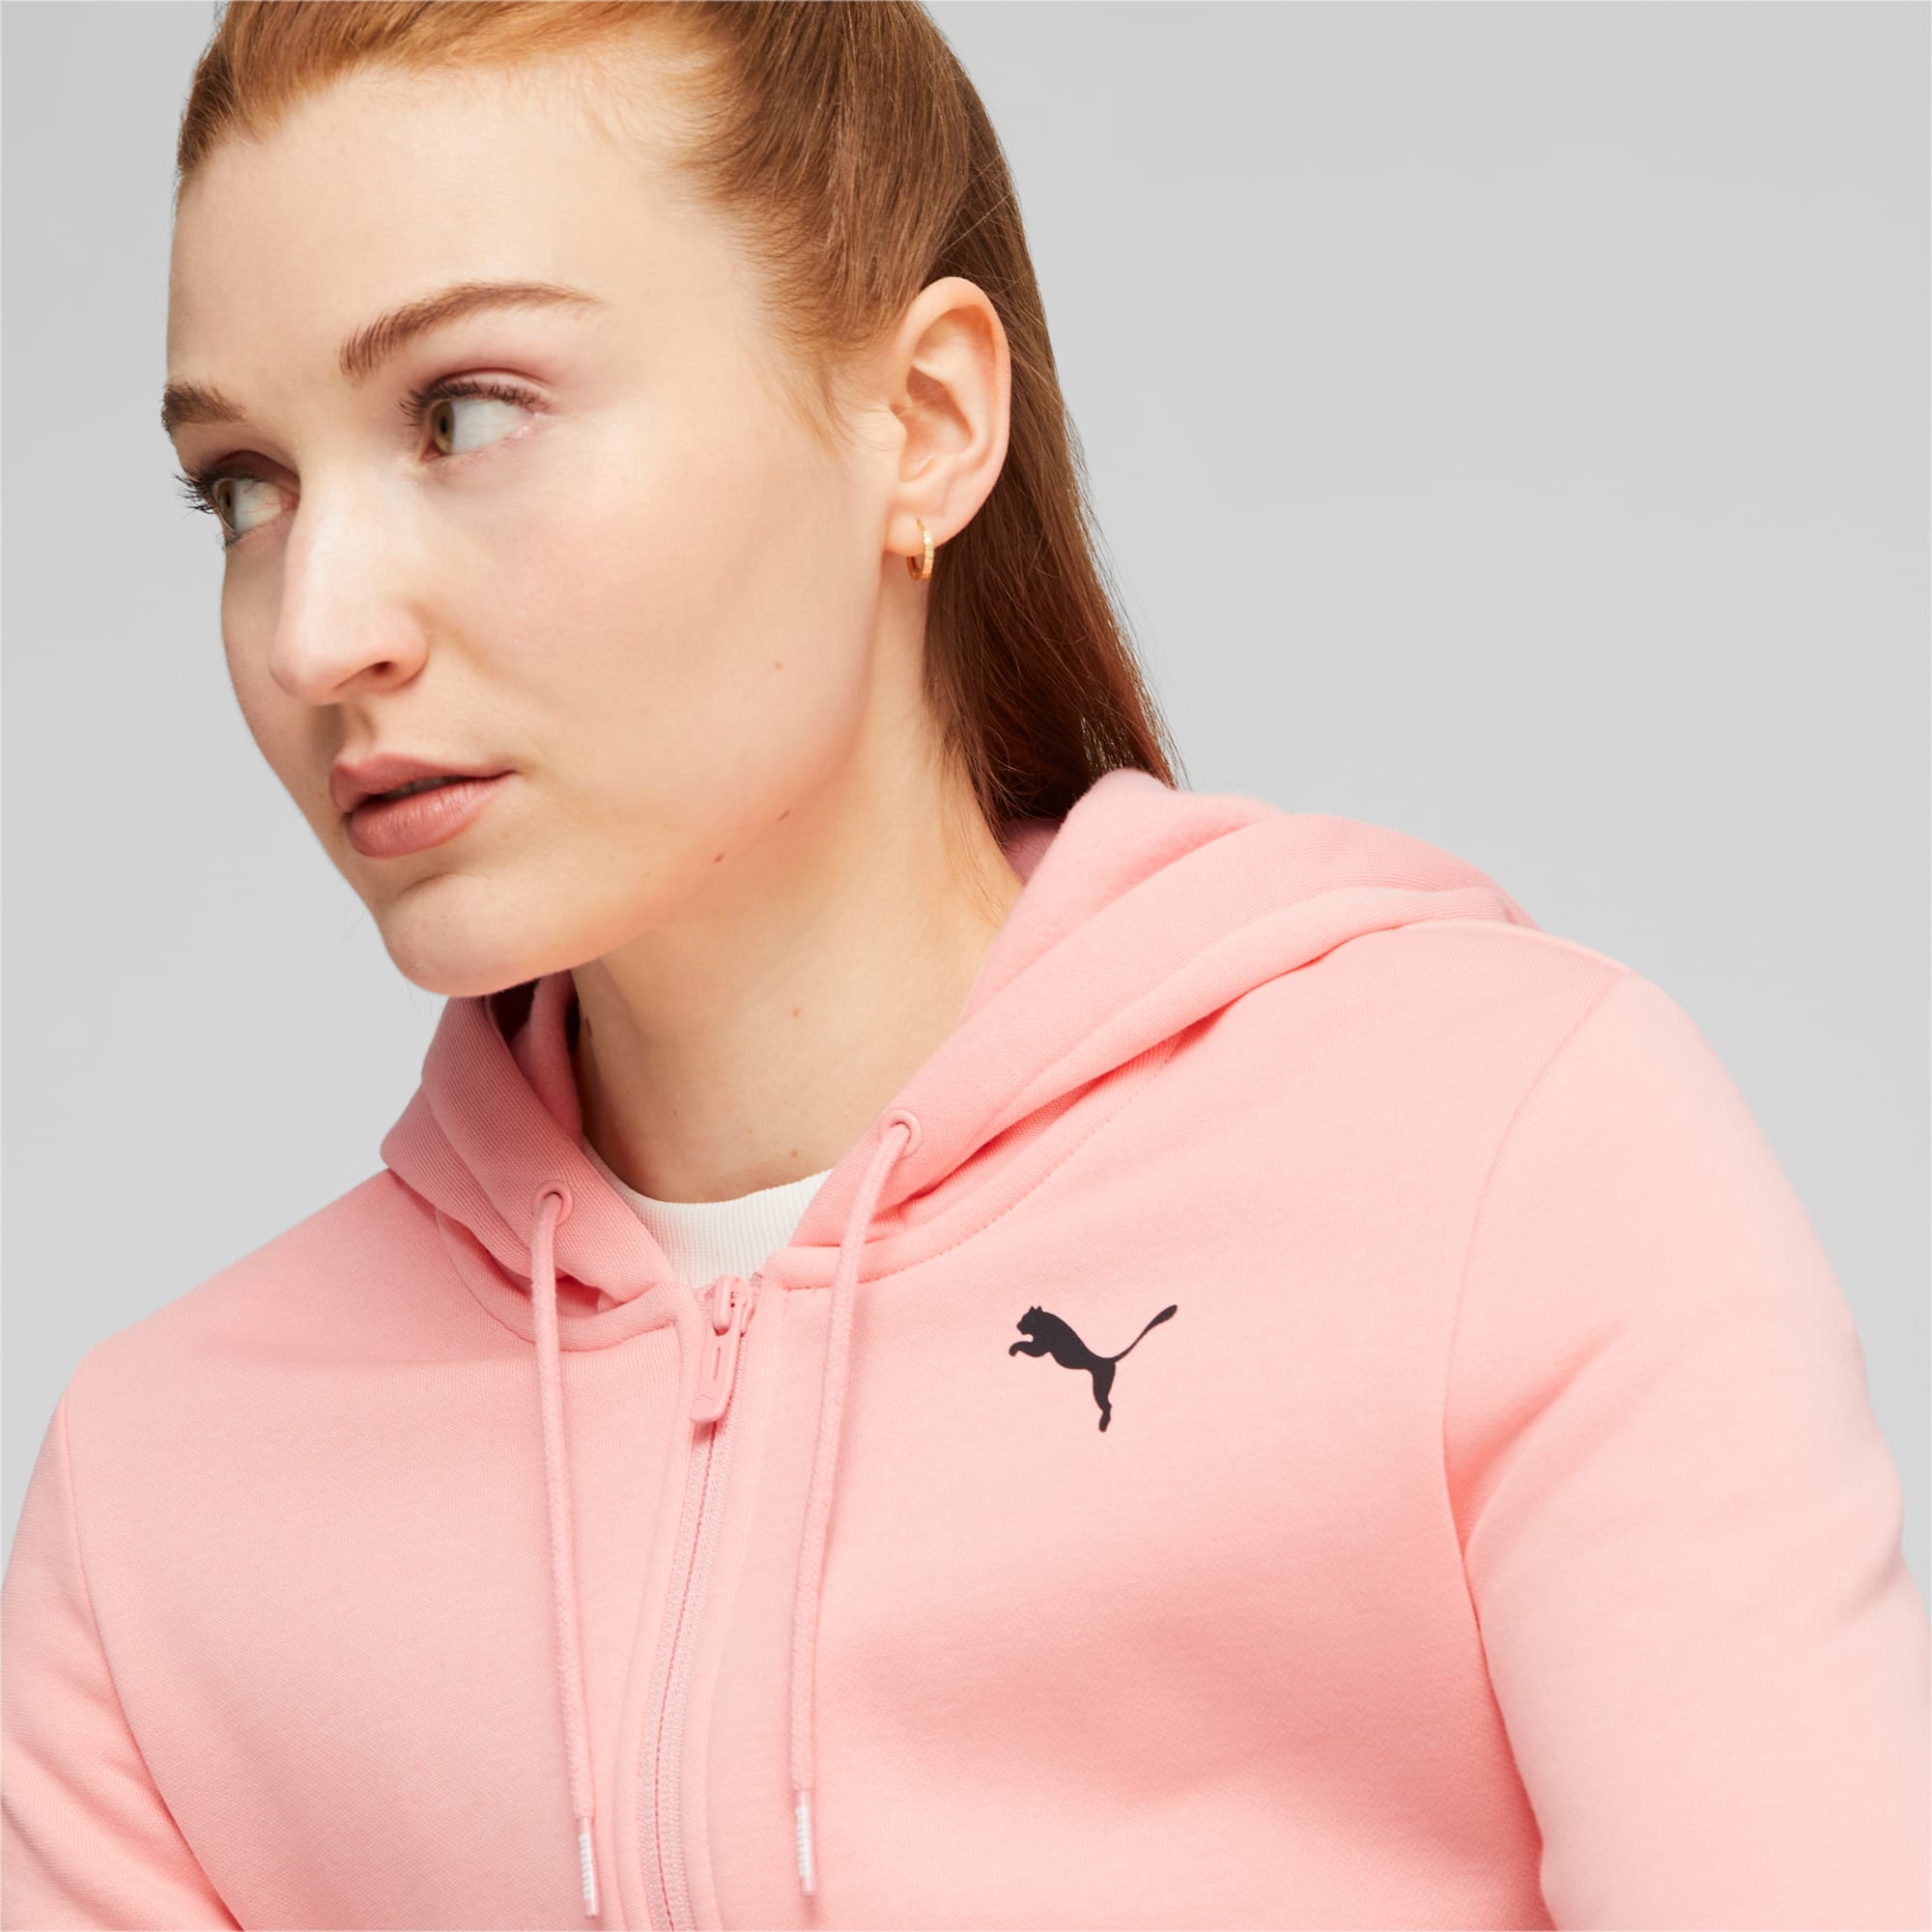 PUMA Classics Hooded Fl Tracksuit Women, Peach Smoothie, Size L, Clothing